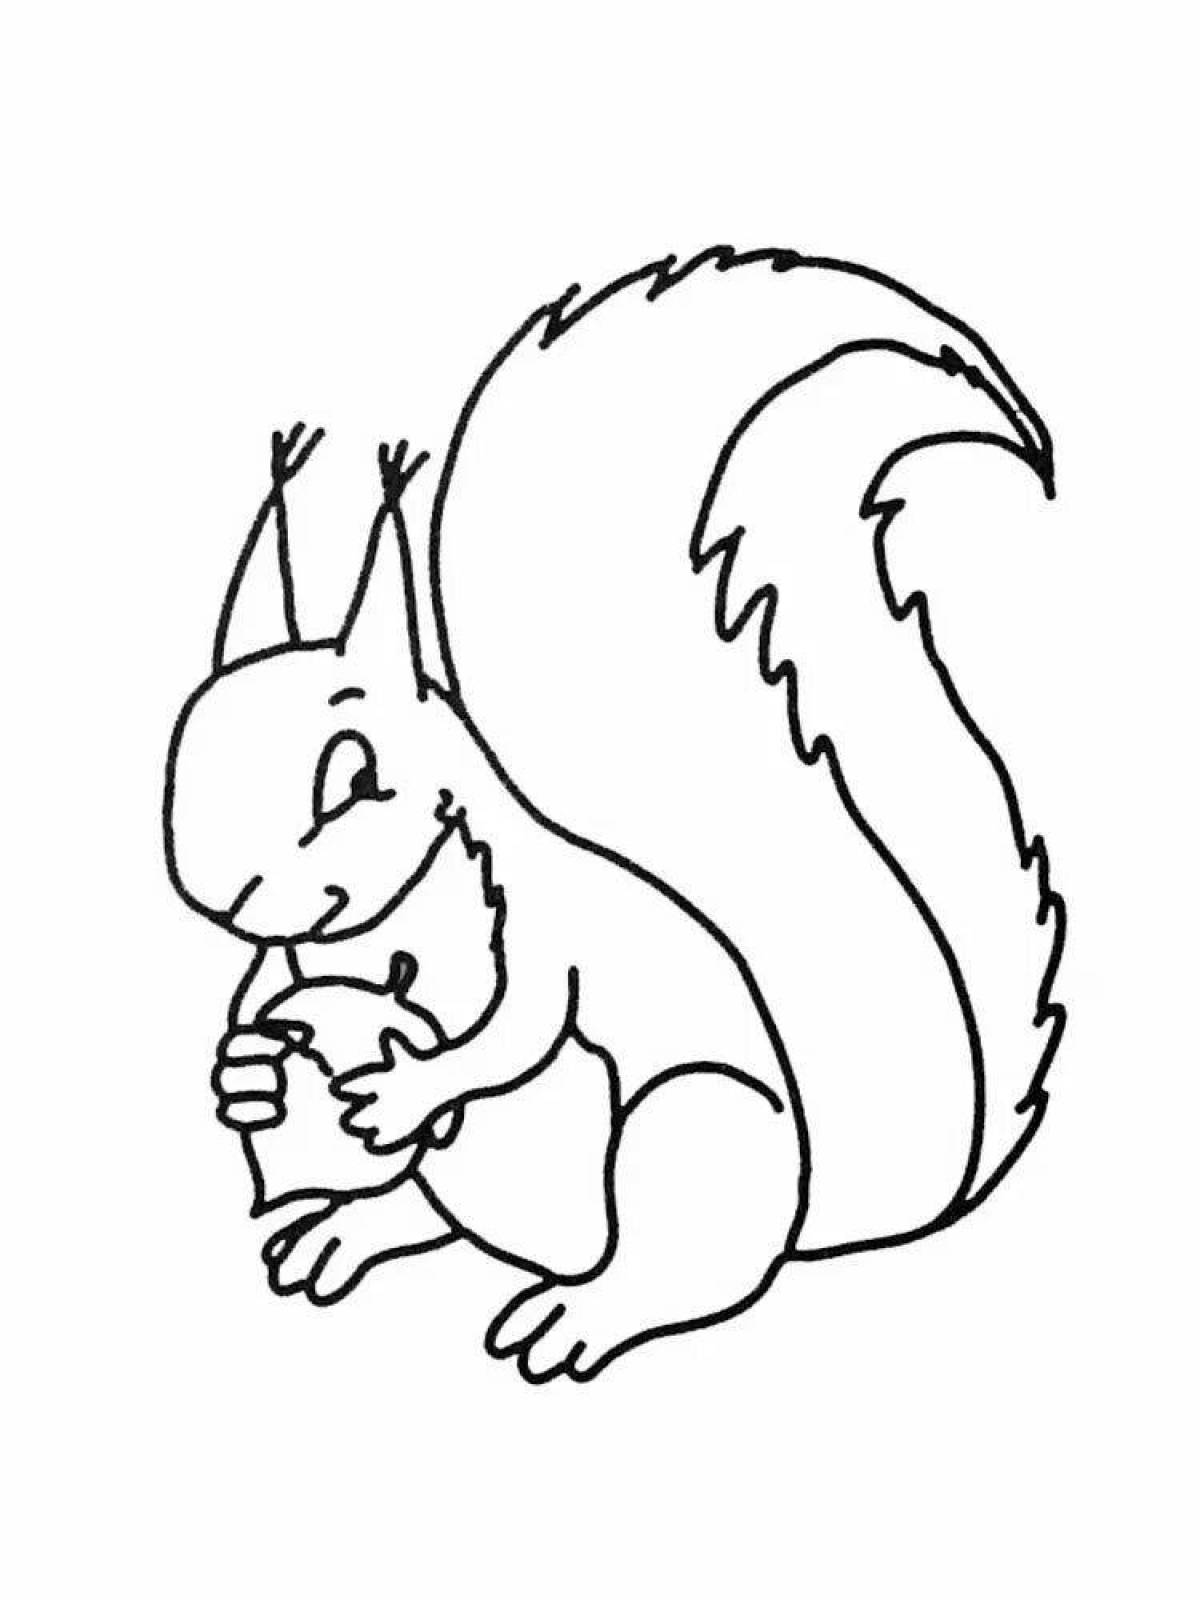 Tempting coloring squirrel drawing